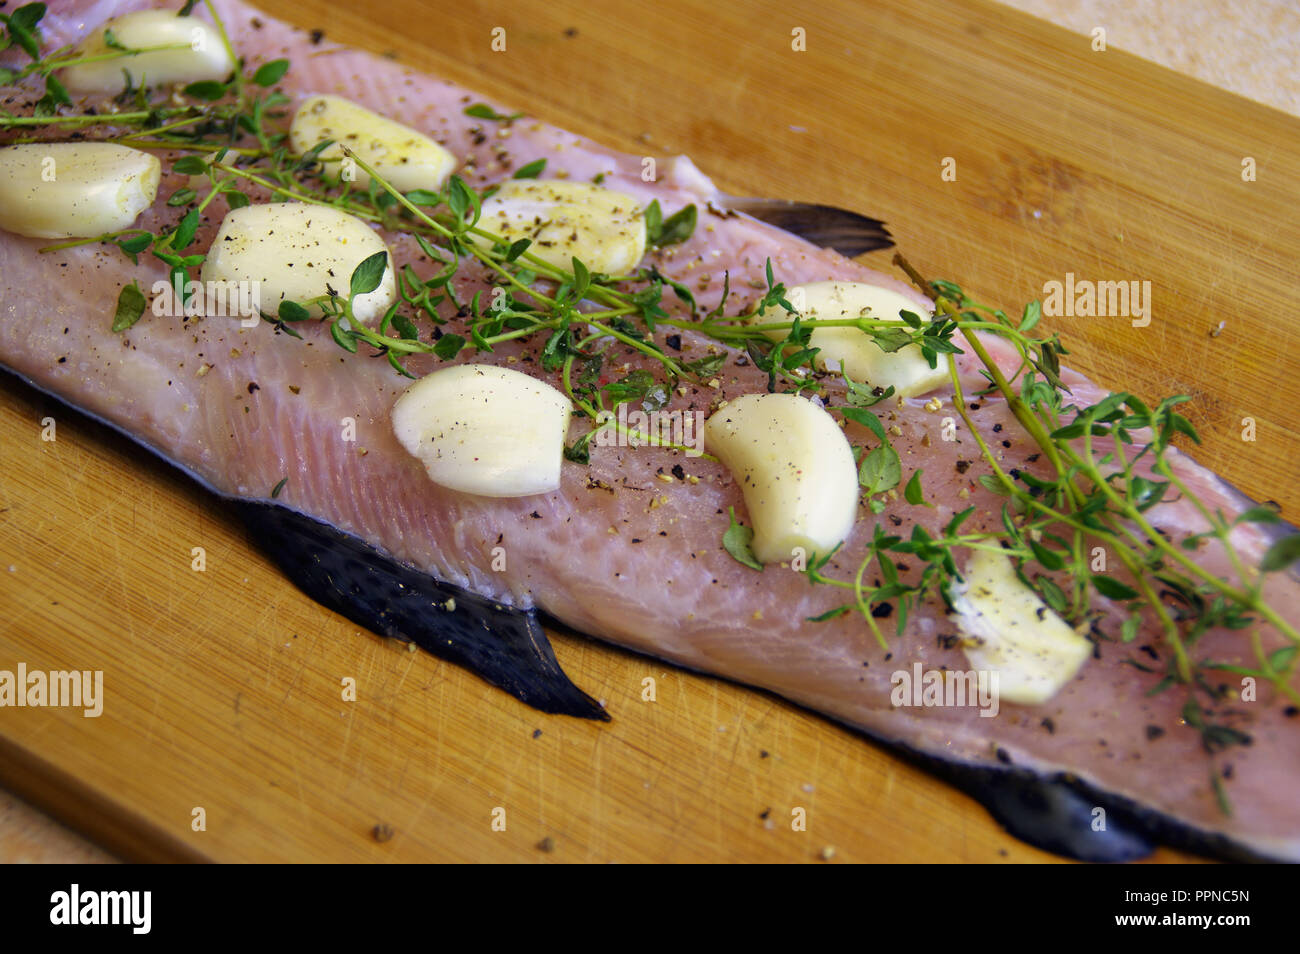 Fresh raw fish prepared for baking. Trout fillet with herbs, garlic and spices on a wooden board Stock Photo